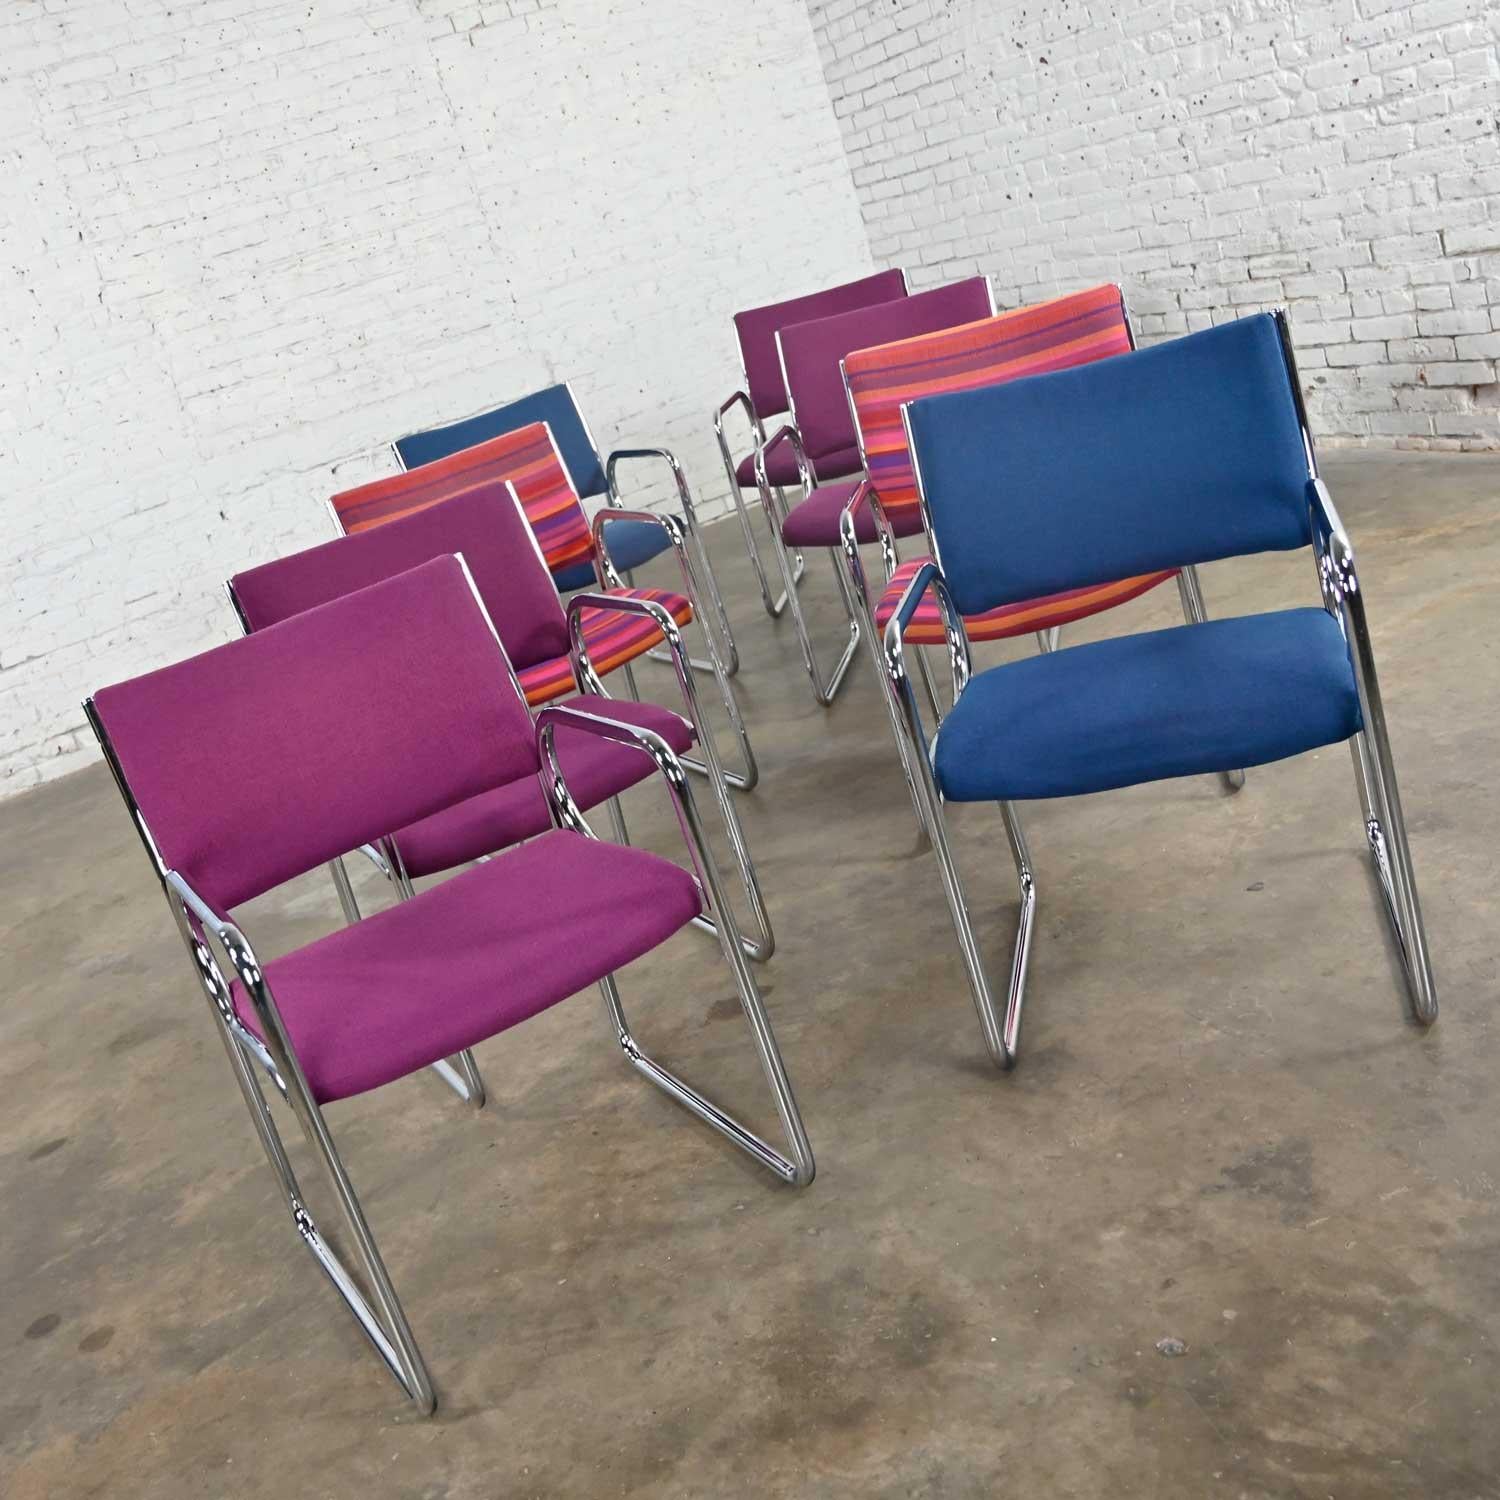 Stunning modern chrome armchairs by Vecta 4 purple, 2 blue, and 2 multicolored striped, set of 8. Beautiful condition, keeping in mind that these are vintage and not new so will have signs of use and wear. The top, upper back corners of the striped